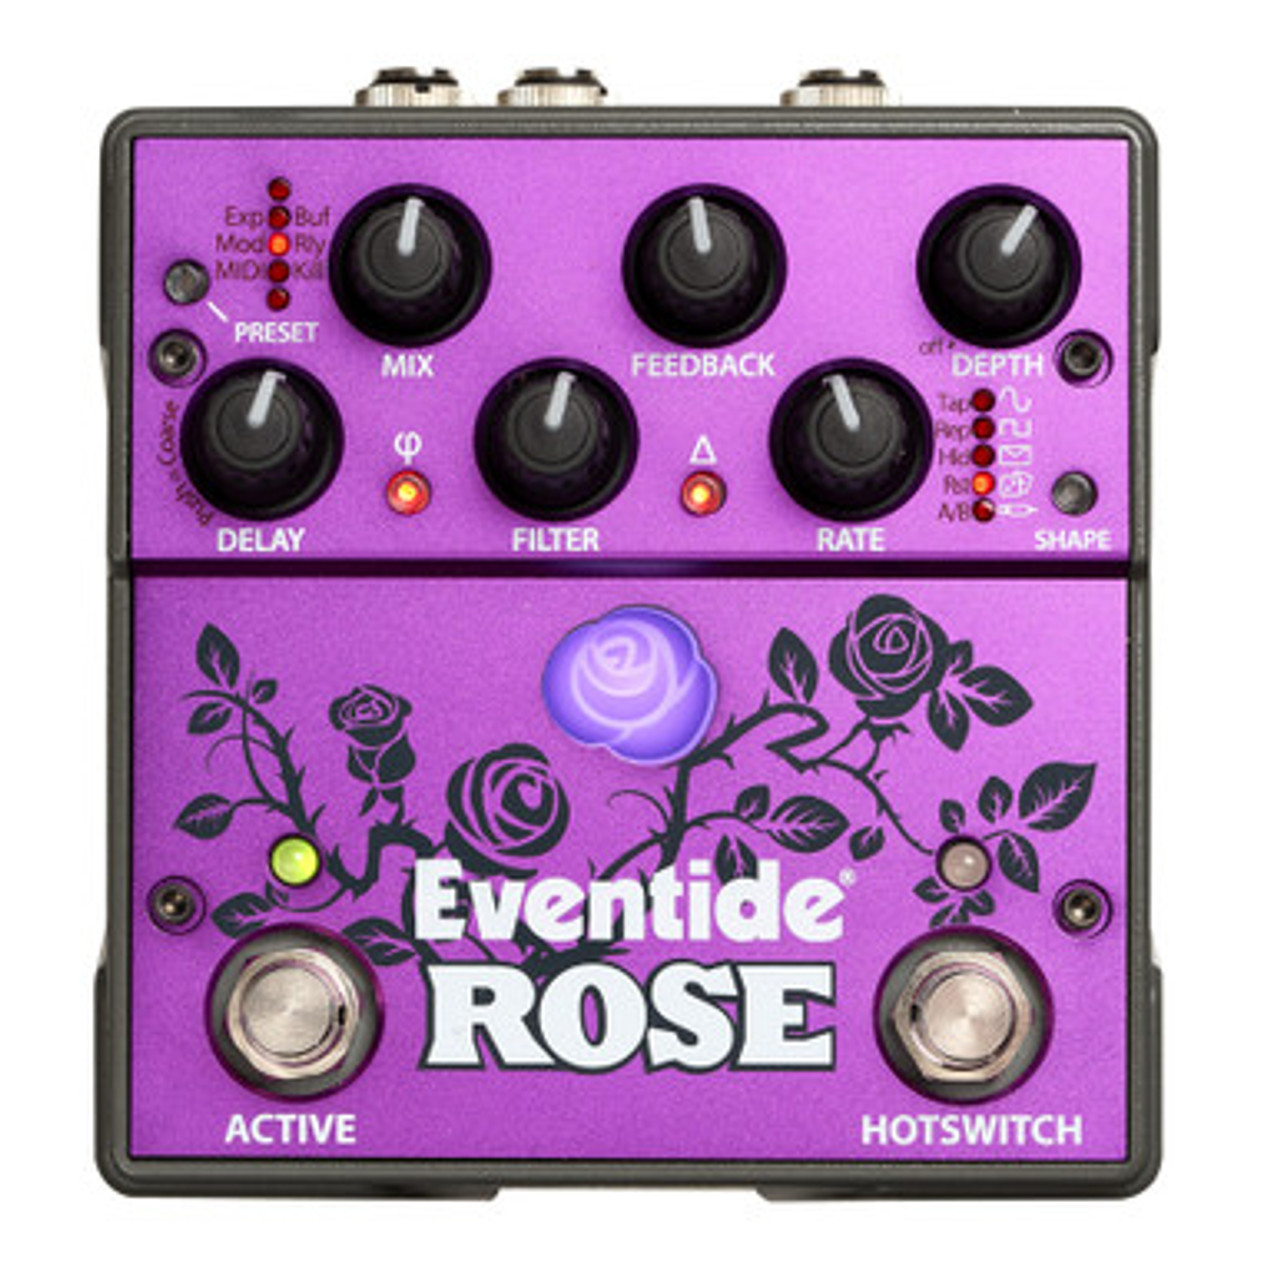 Eventide Rose Modulated Delay Pedal